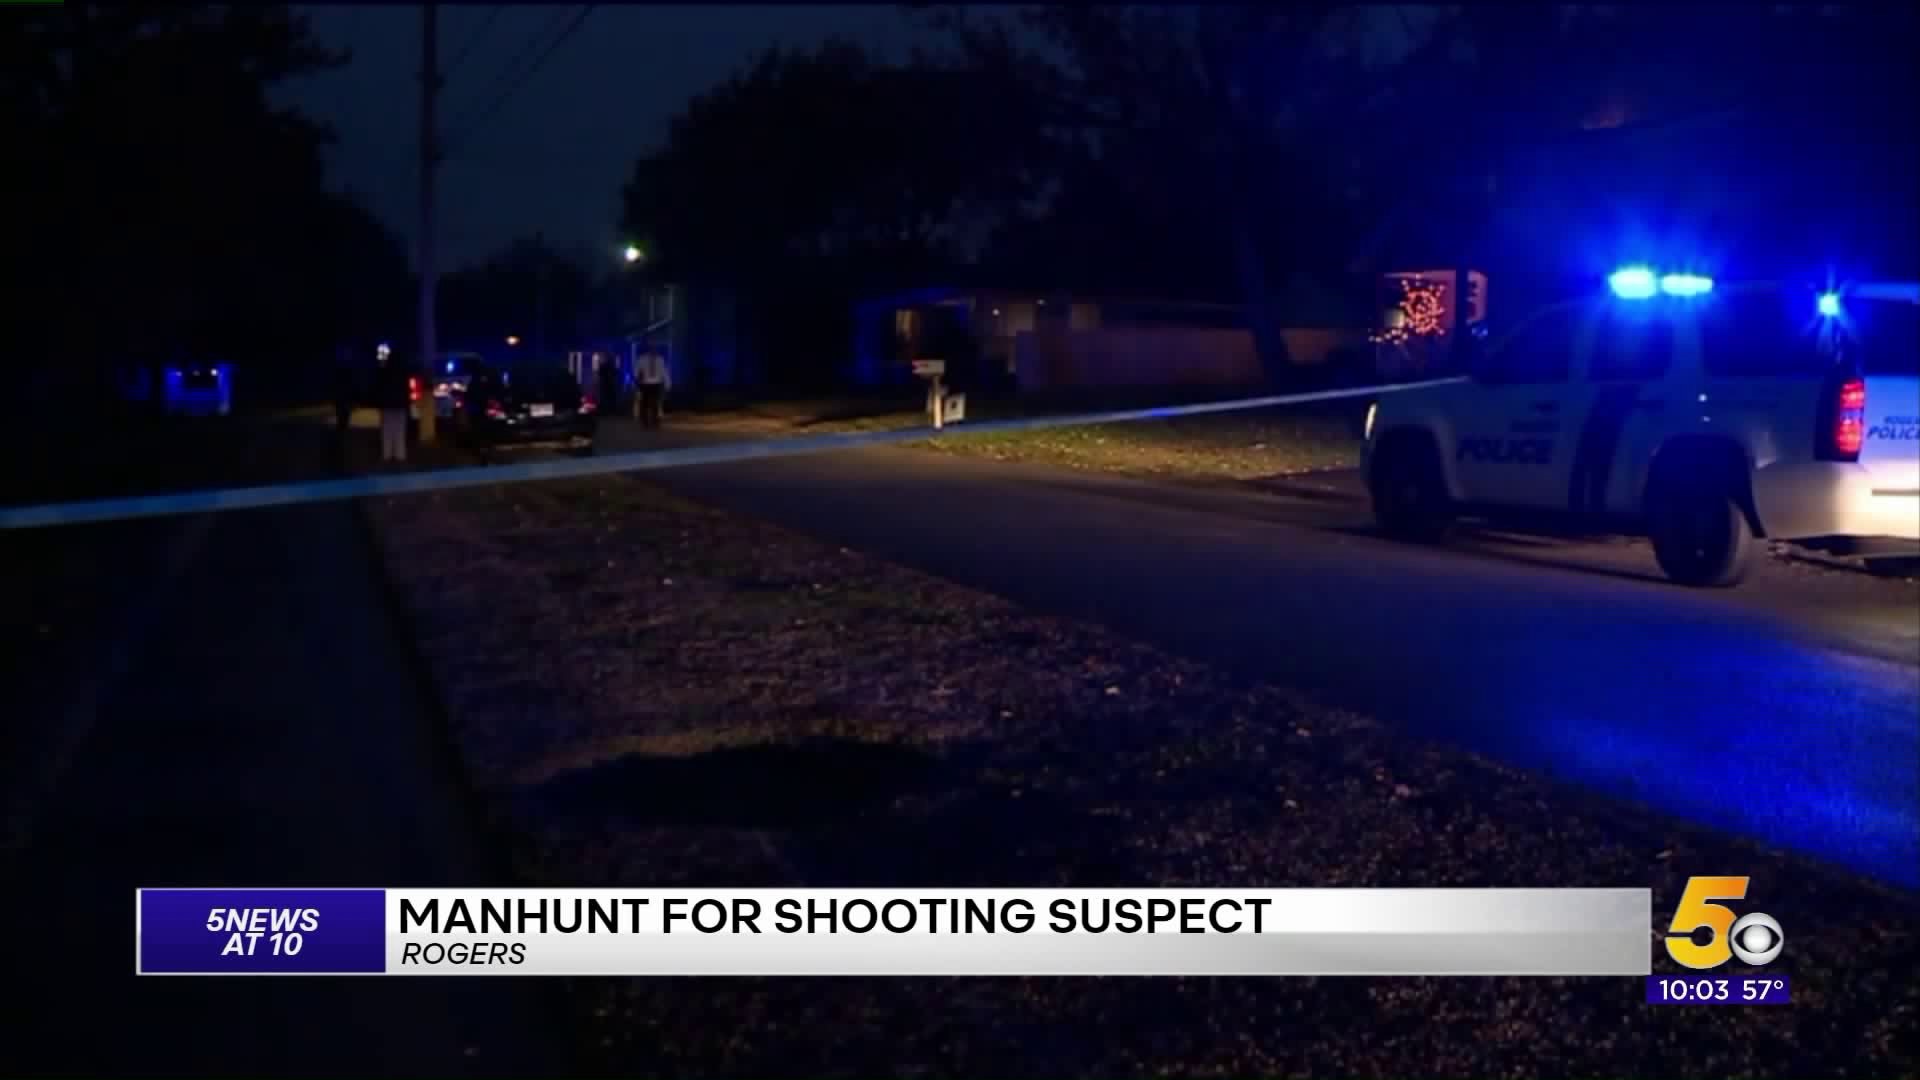 Manhunt in Rogers for Shooting Suspect